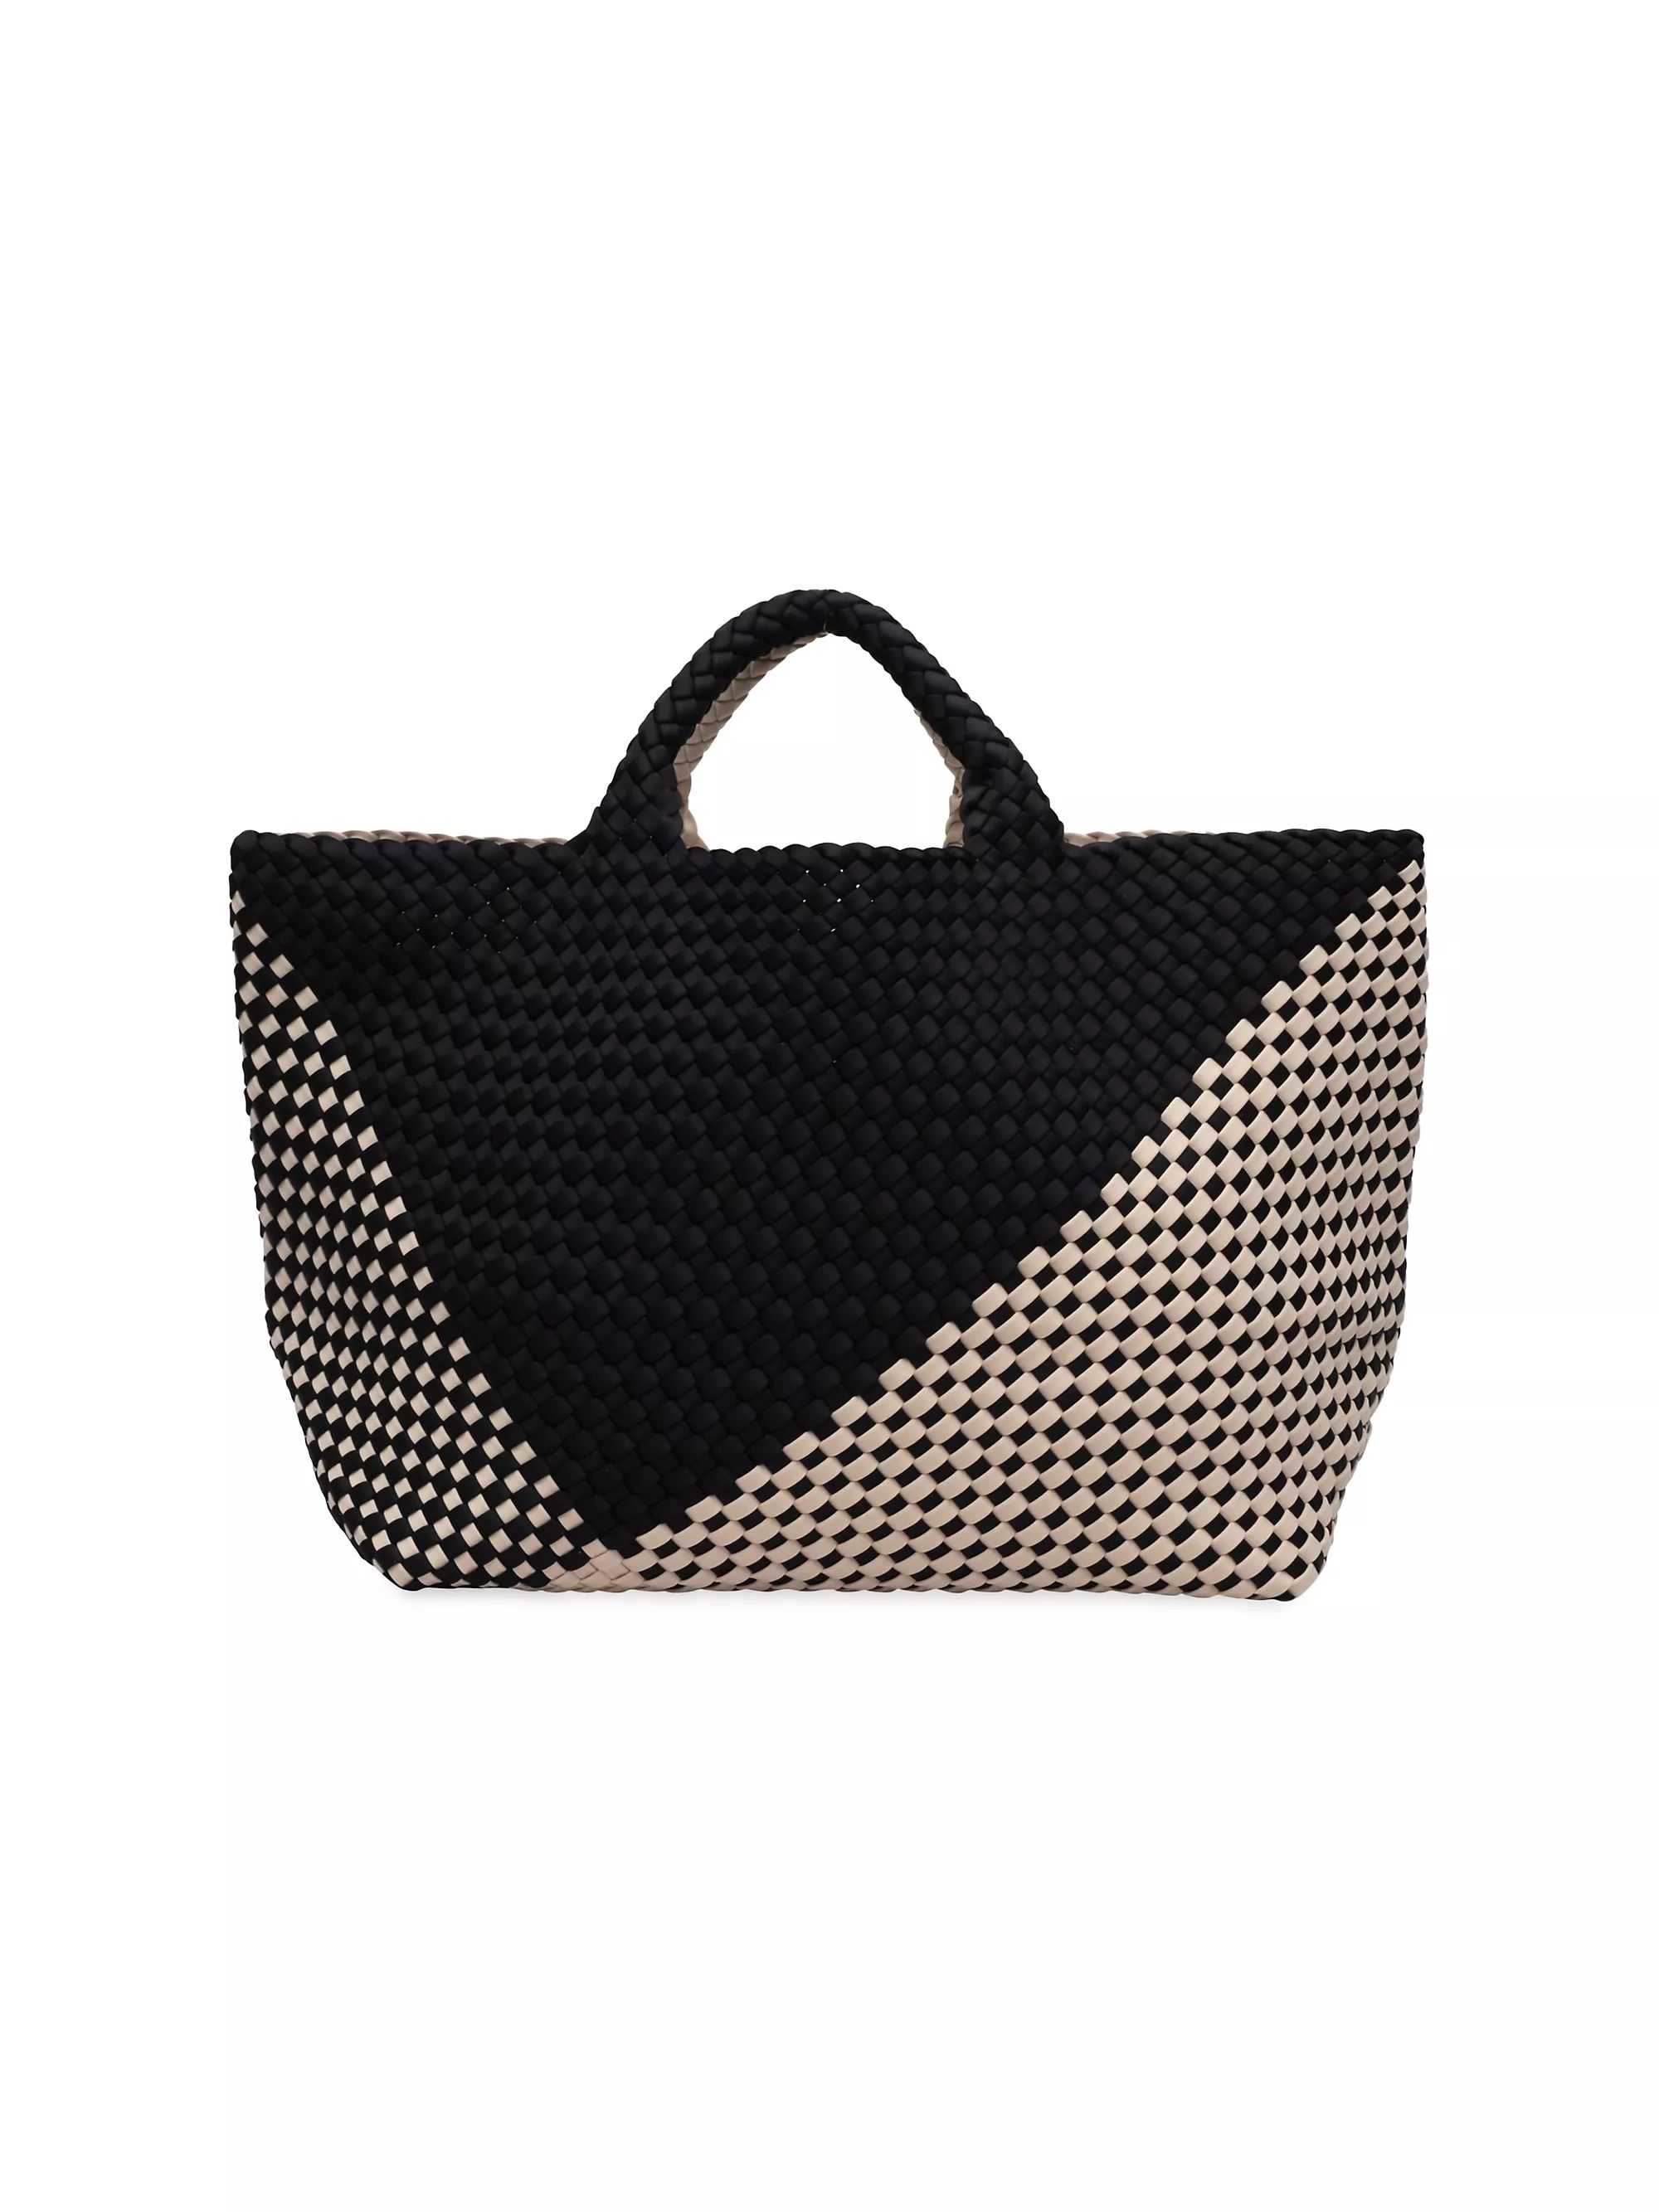 St. Barths Large Graphic Geo Tote Bag | Saks Fifth Avenue